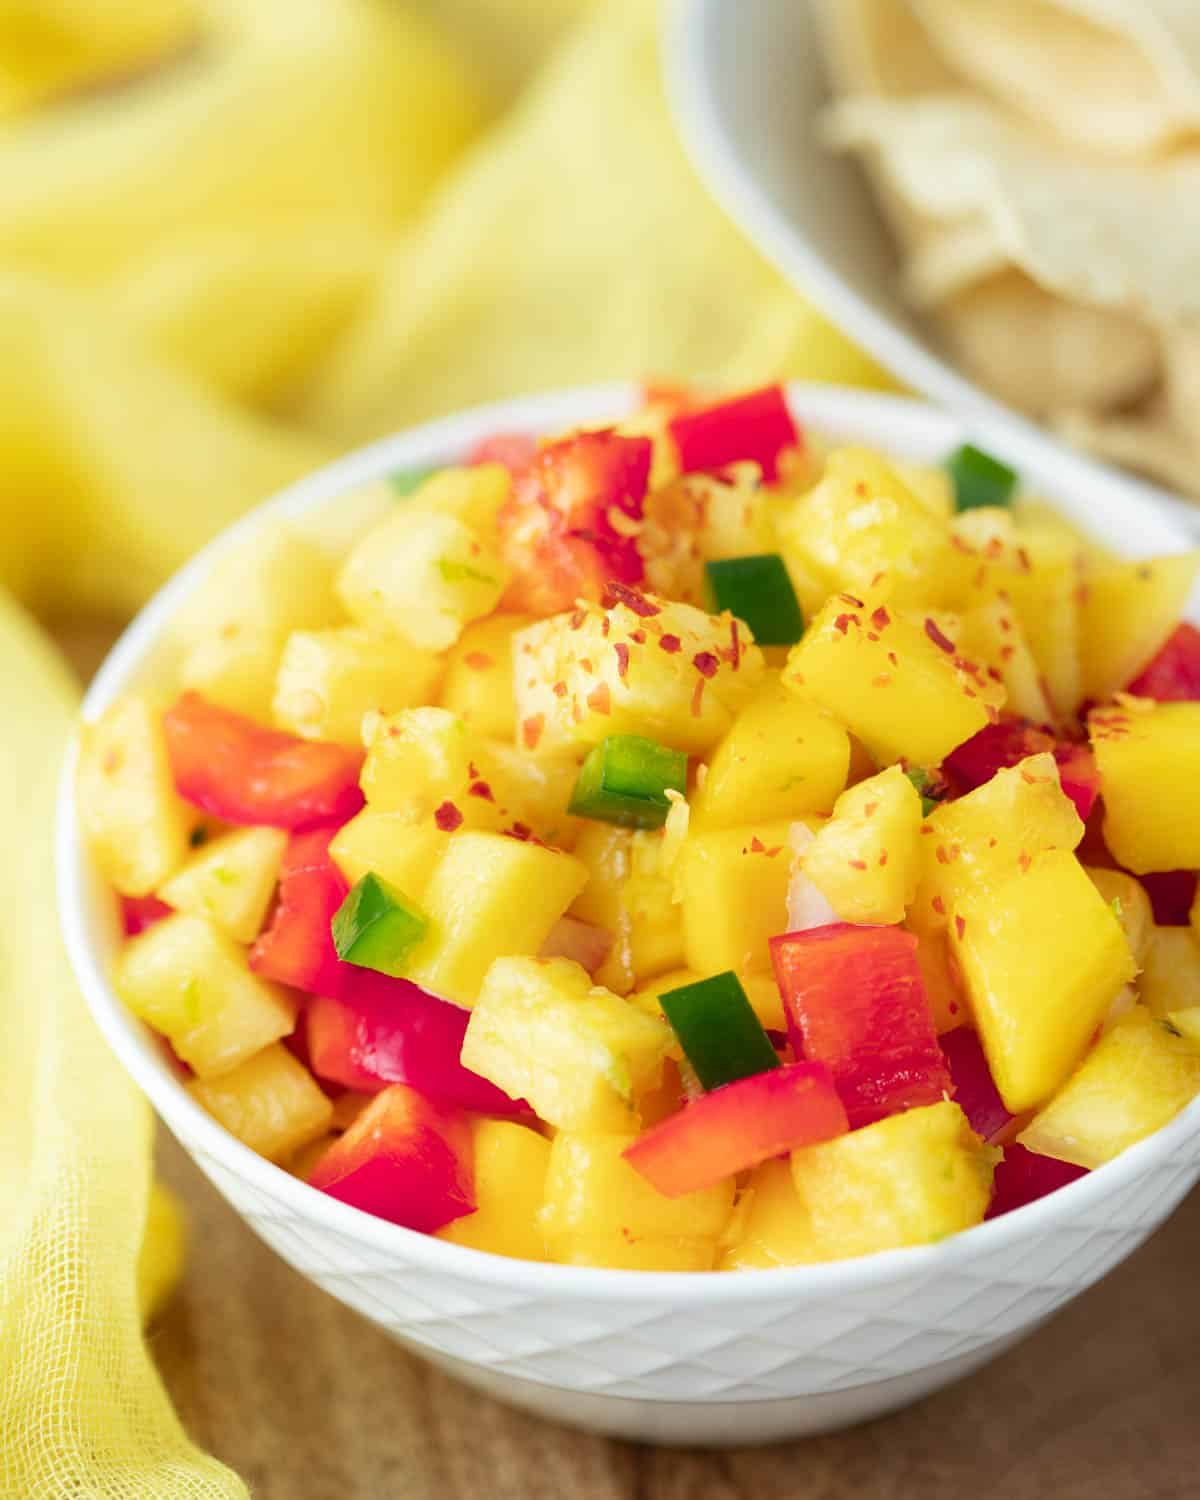 Pineapple mango salsa topped with red pepper flakes in a small white serving bowl.
